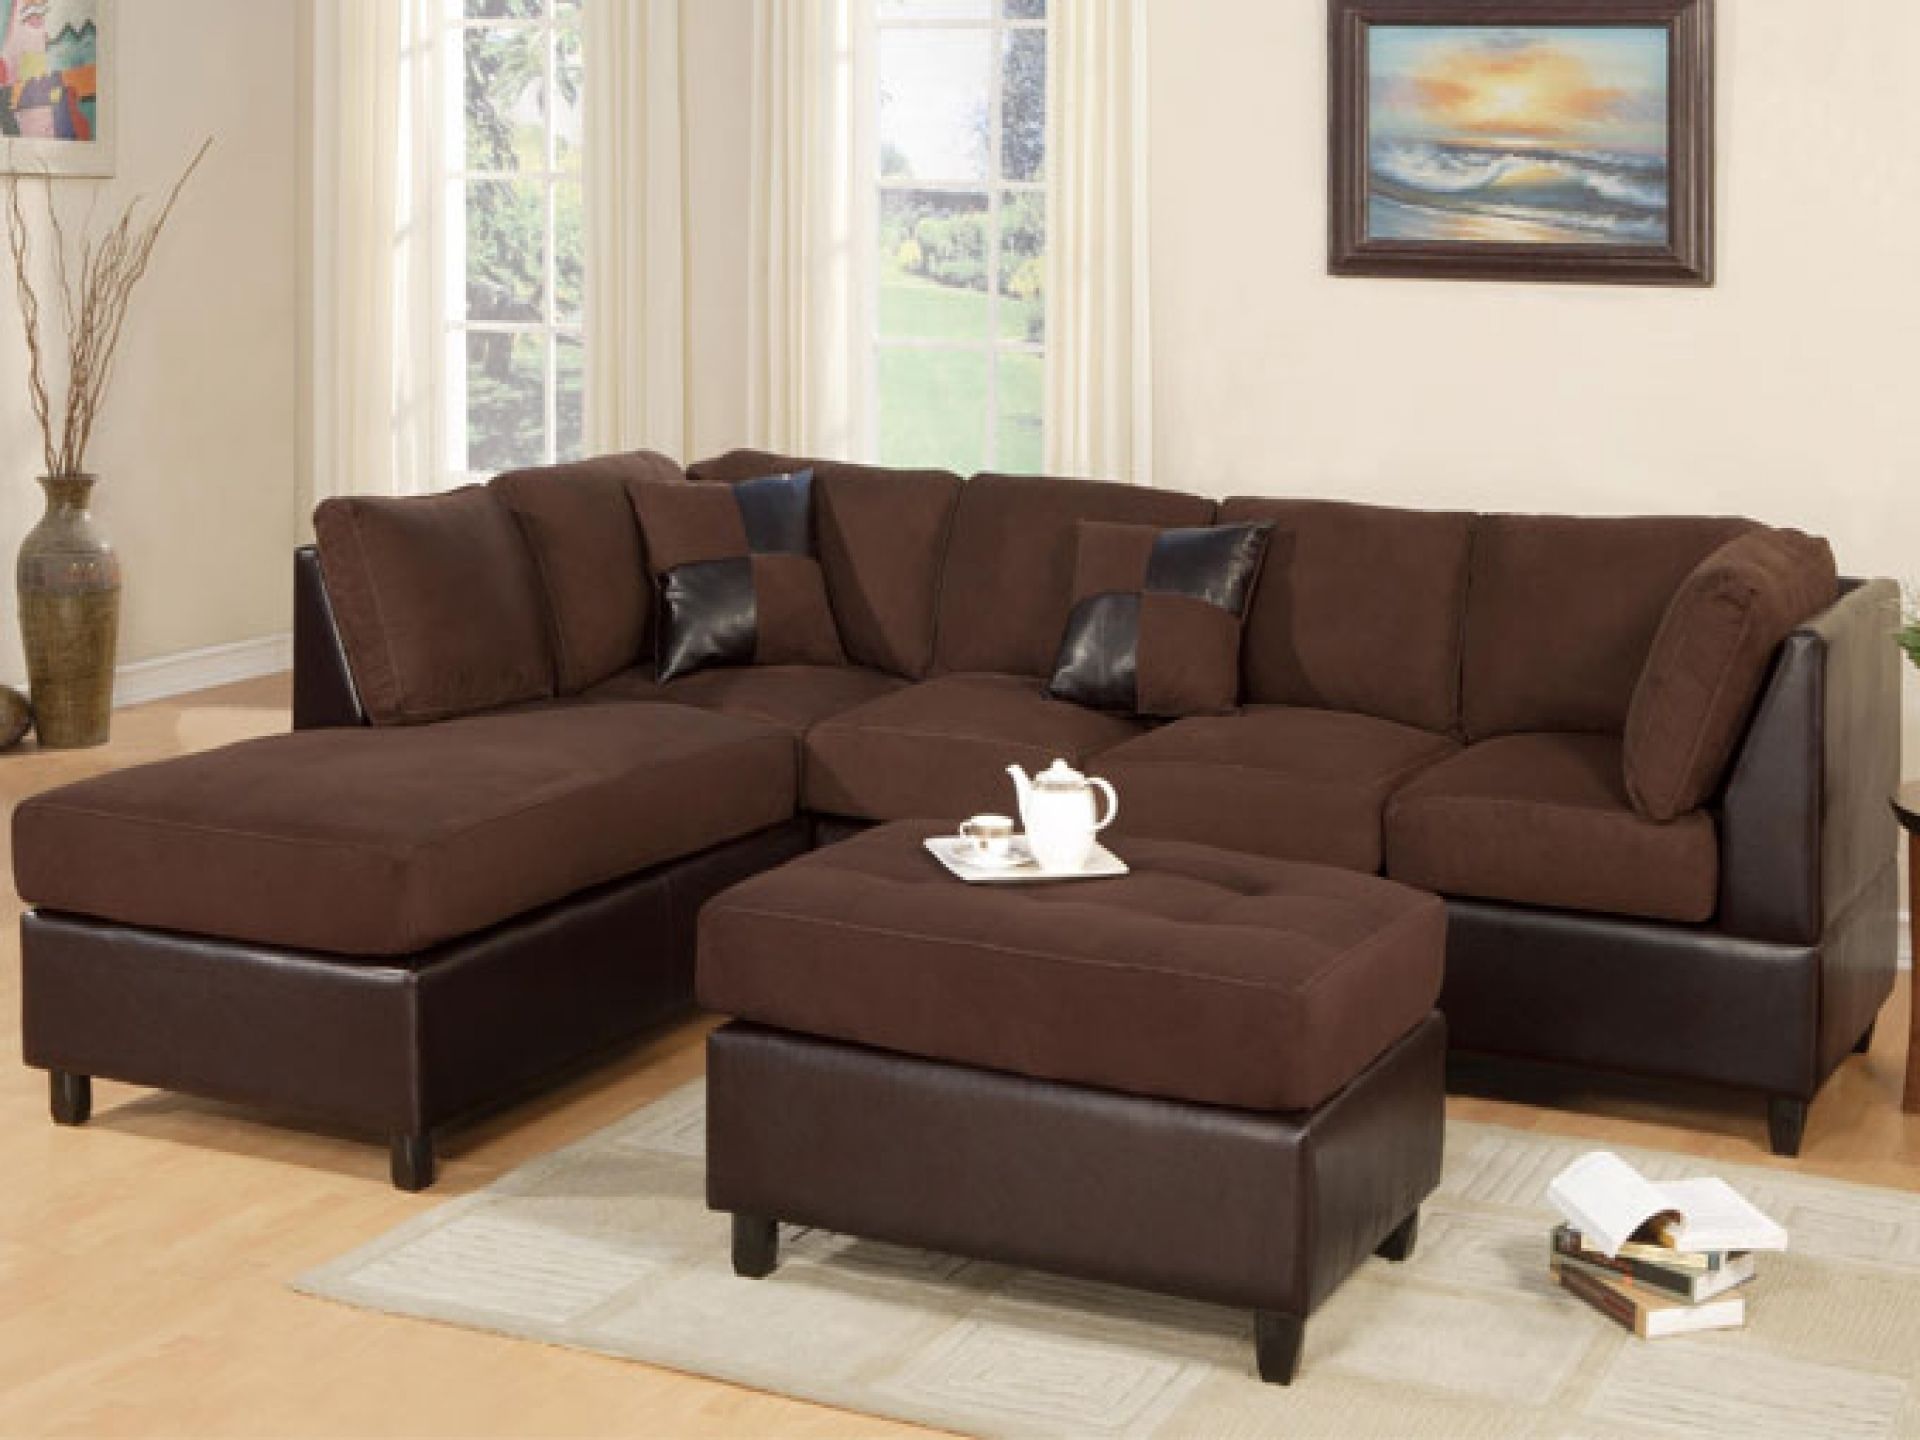 Furniture : Sectional Couch Okc Sectional Sofa Gainesville Fl For Gainesville Fl Sectional Sofas (View 7 of 10)